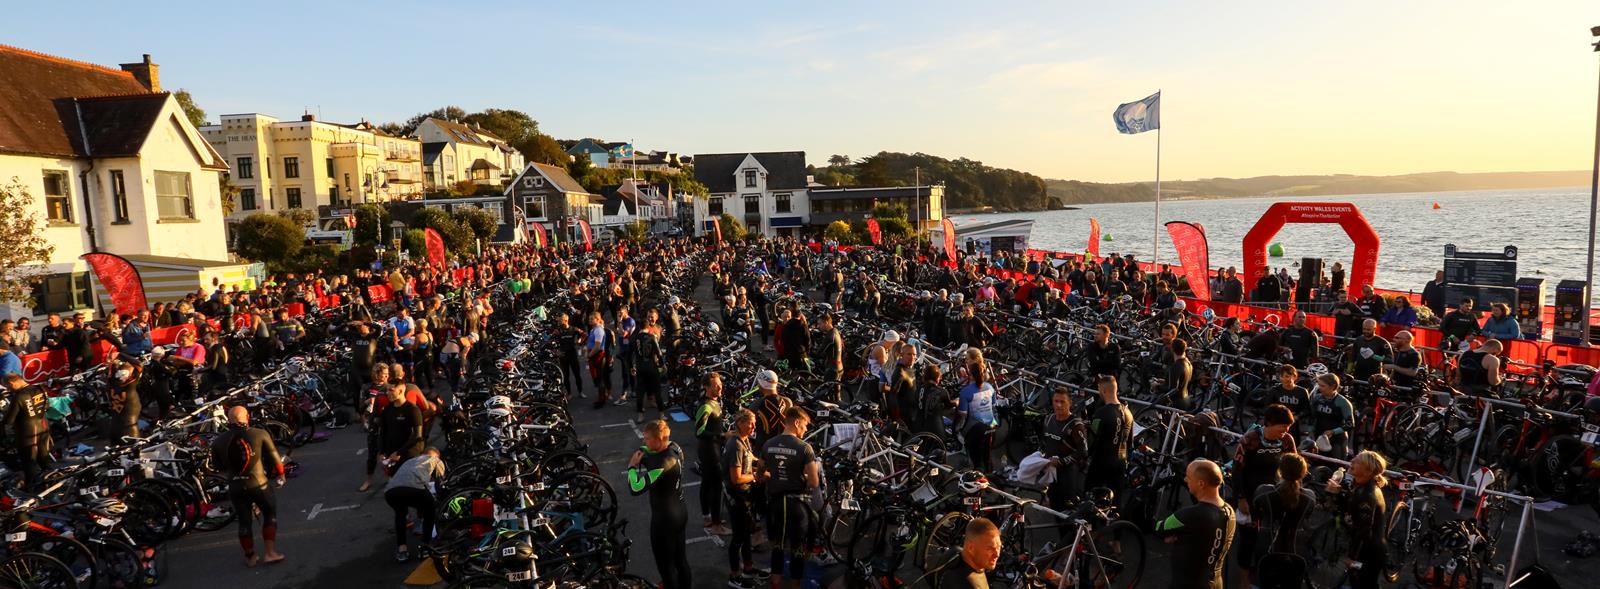 3-year partnership extension with host WICC for Saundersfoot Triathlon